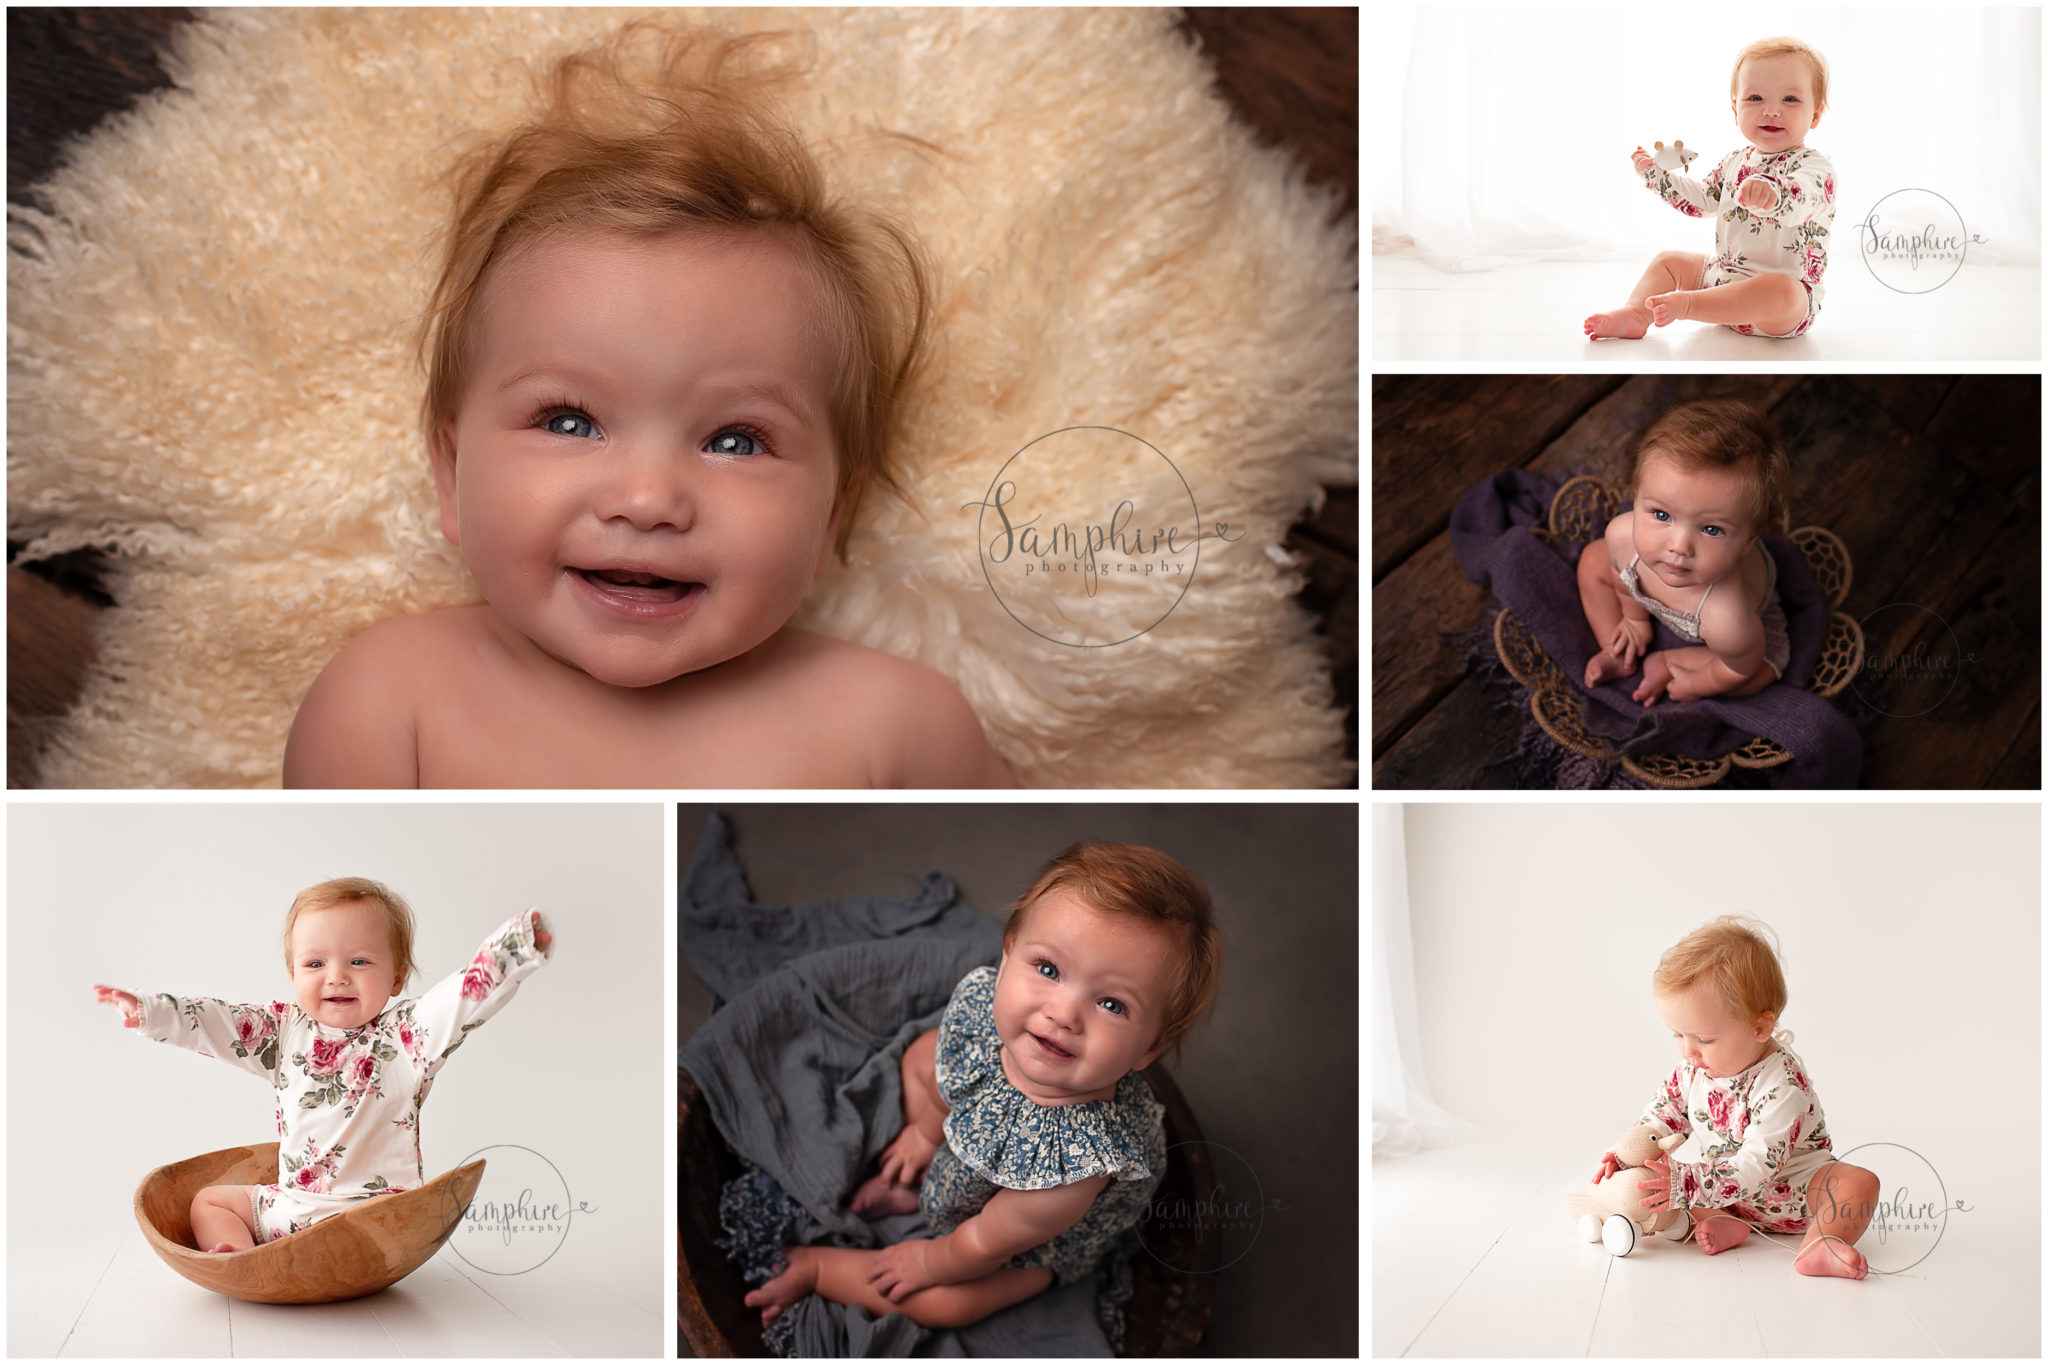 Baby Photo Shoot By Samphire Photography Sussex